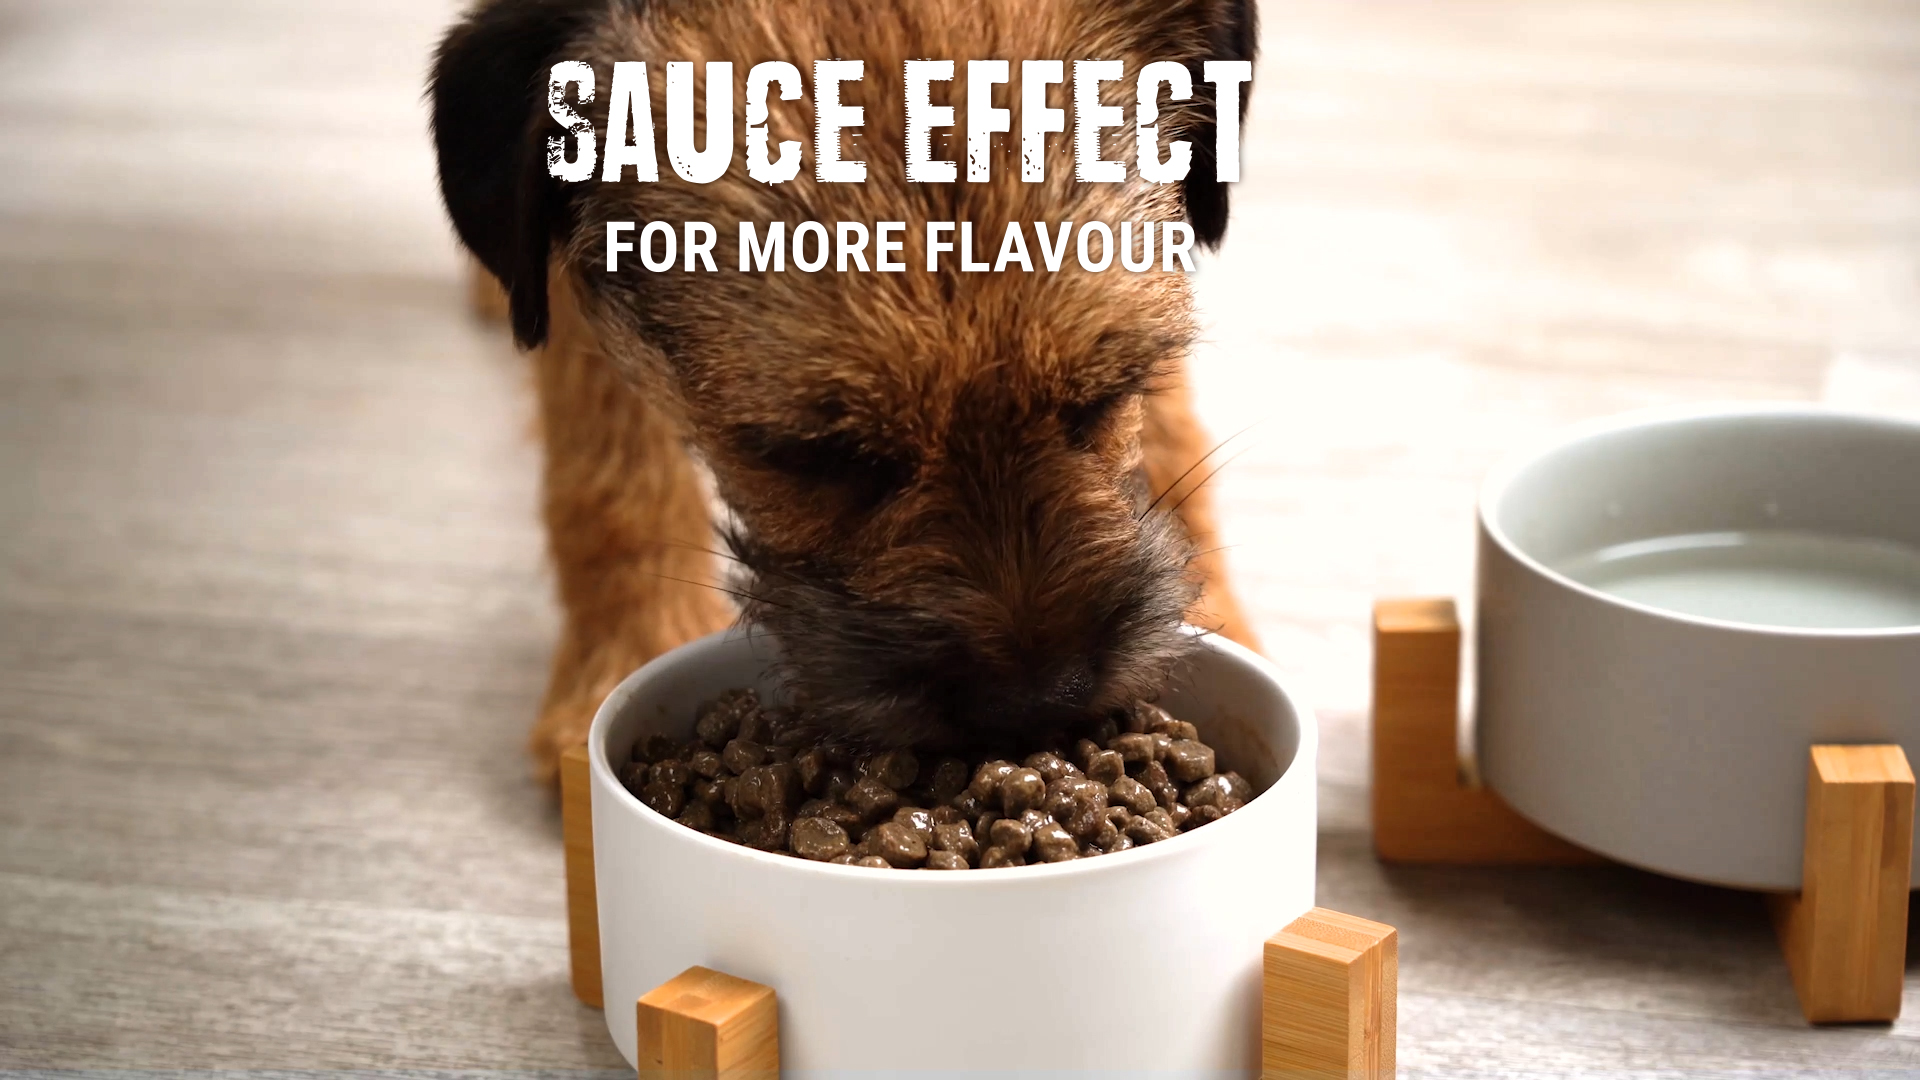 Sauce effect for more flavour